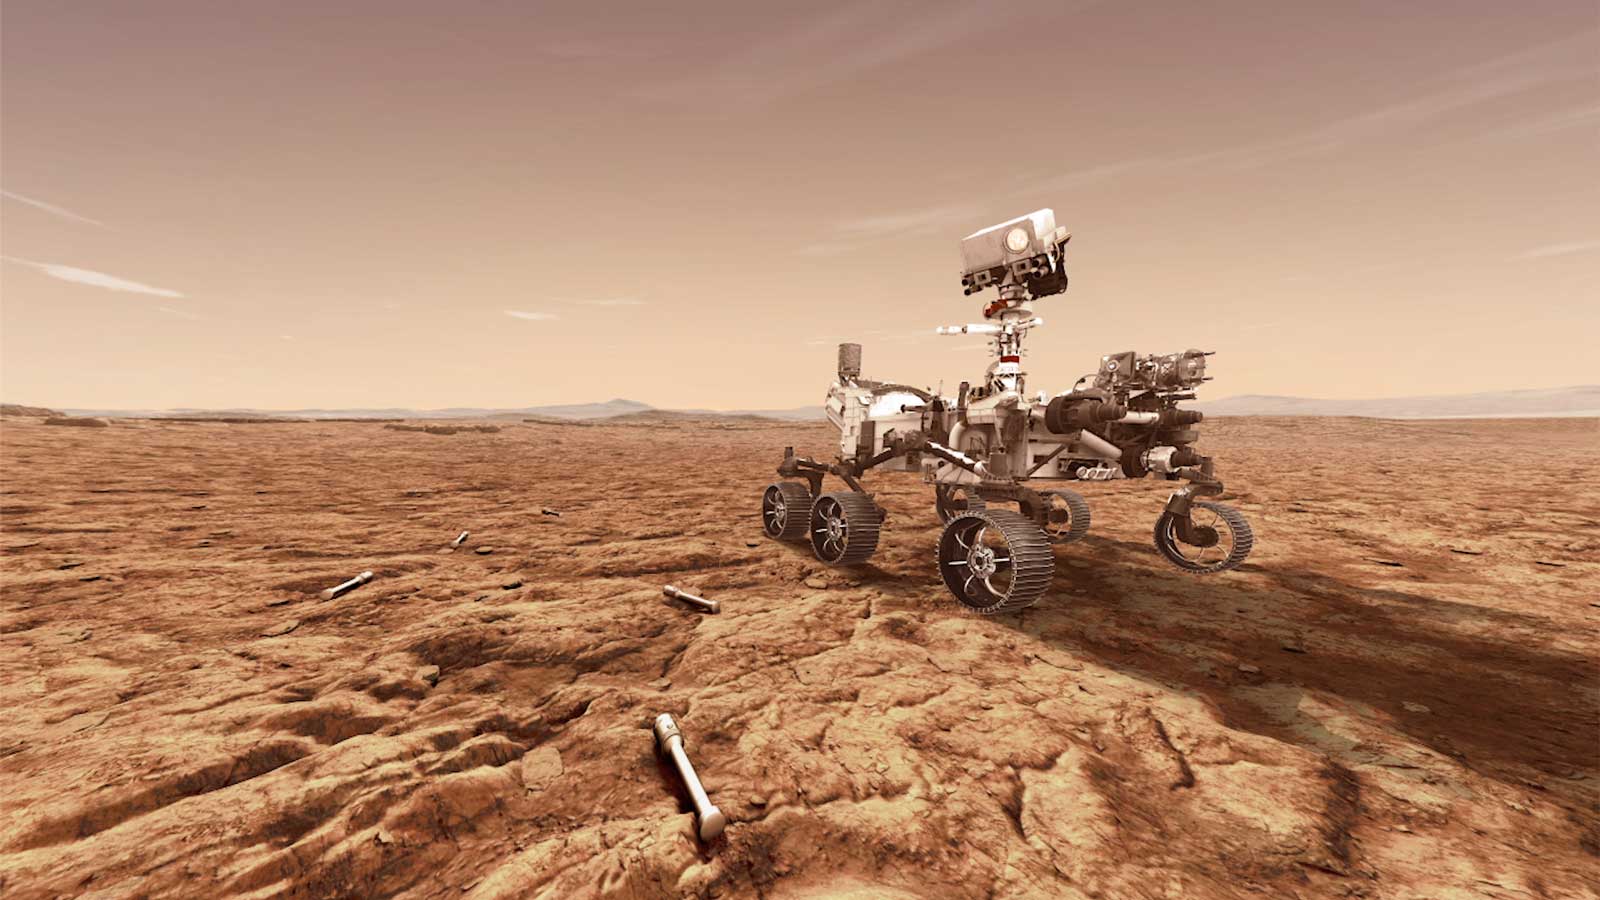 NASA’s Perseverance Rover Signs of Life on Mars